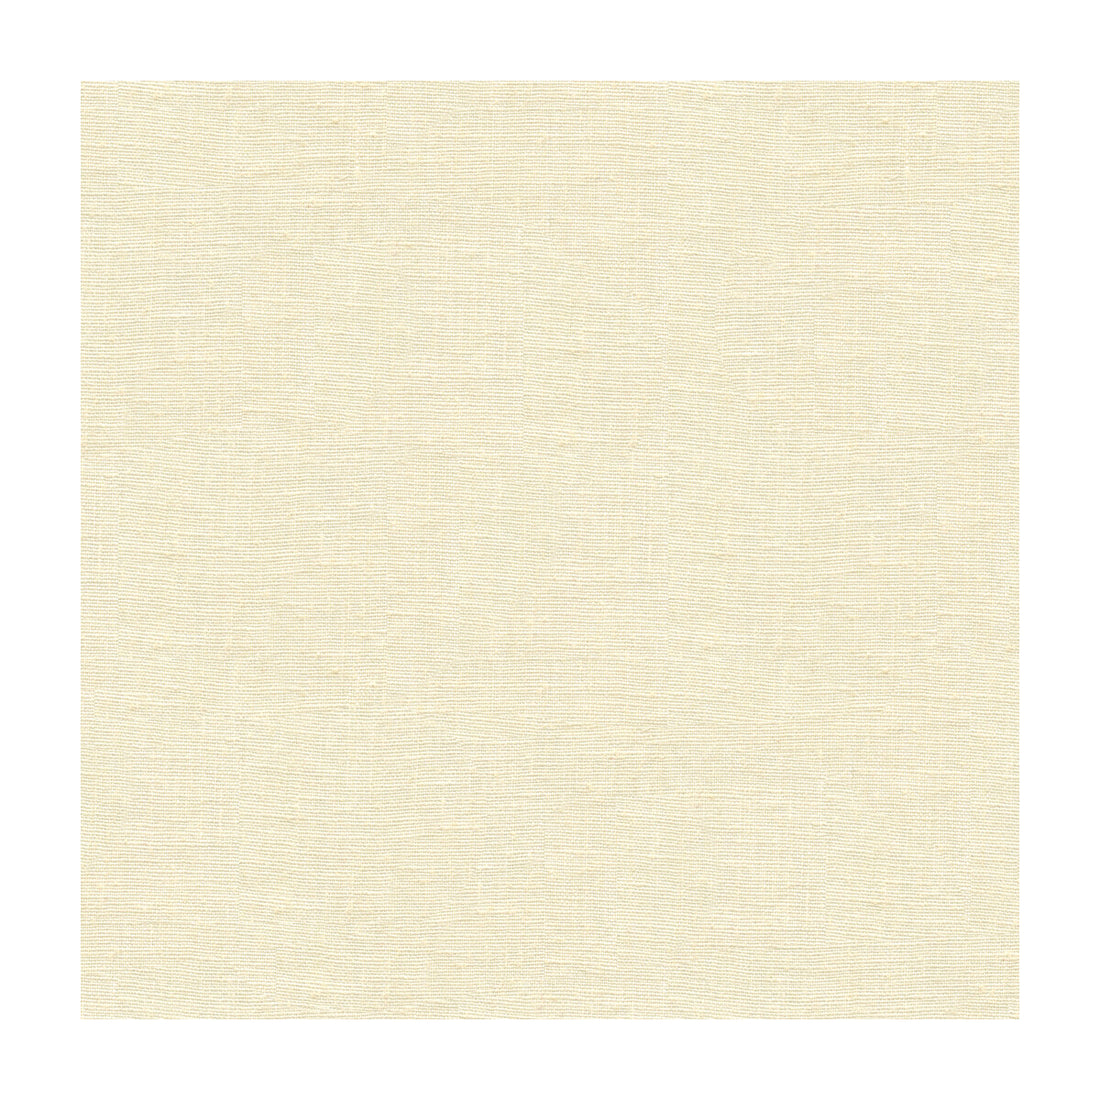 Dublin fabric in cream color - pattern 32344.111.0 - by Kravet Basics in the Perfect Plains collection